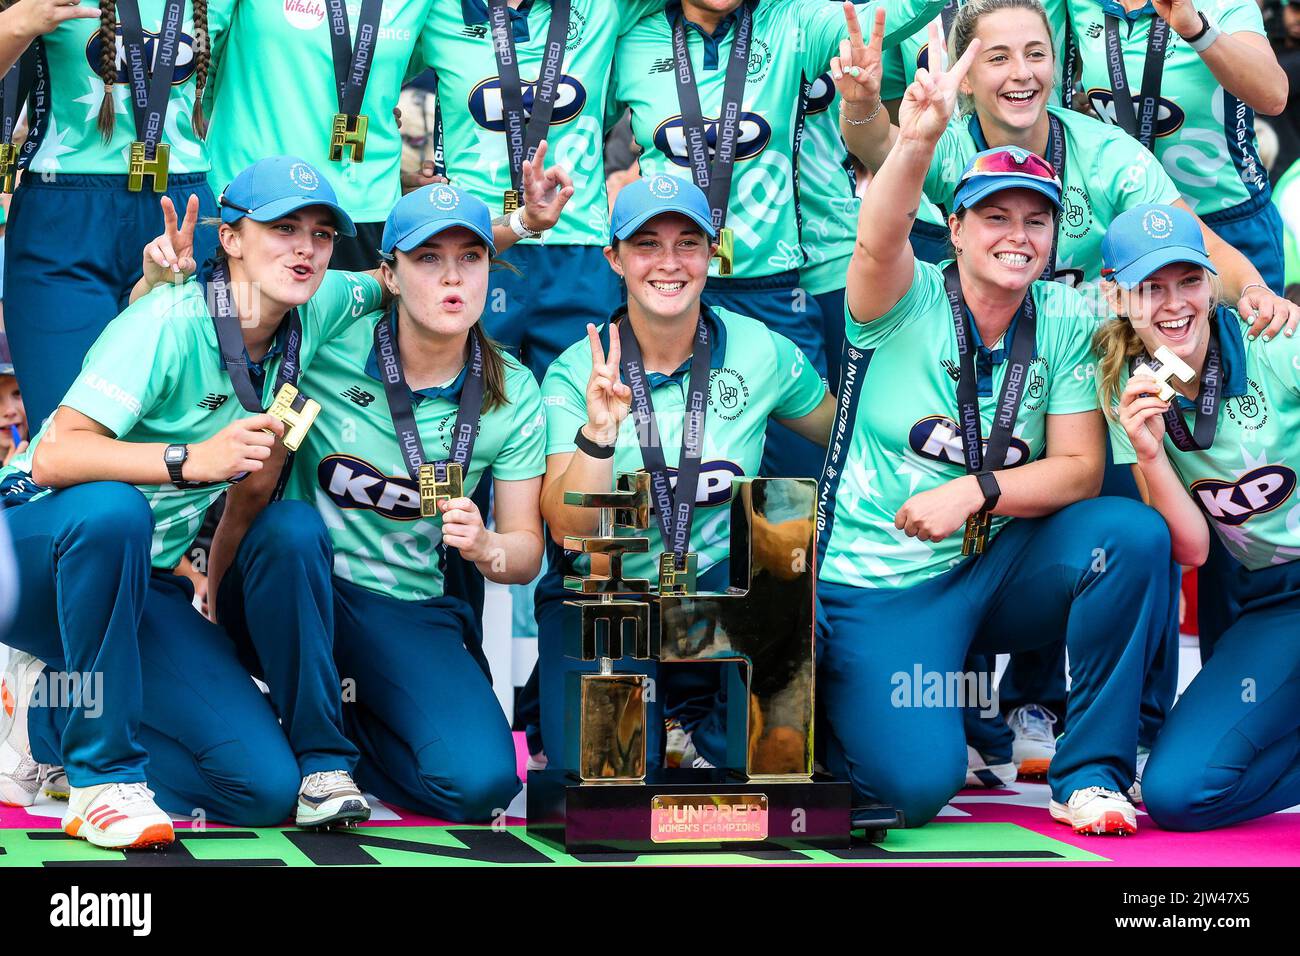 Oval Invinciples players celebrate winning with the trophy during the The Hundred Women's Final Oval Invincibles Women vs Southern Brave Women at The Kia Oval, London, United Kingdom, 3rd September 2022  (Photo by Ben Whitley/News Images) Stock Photo